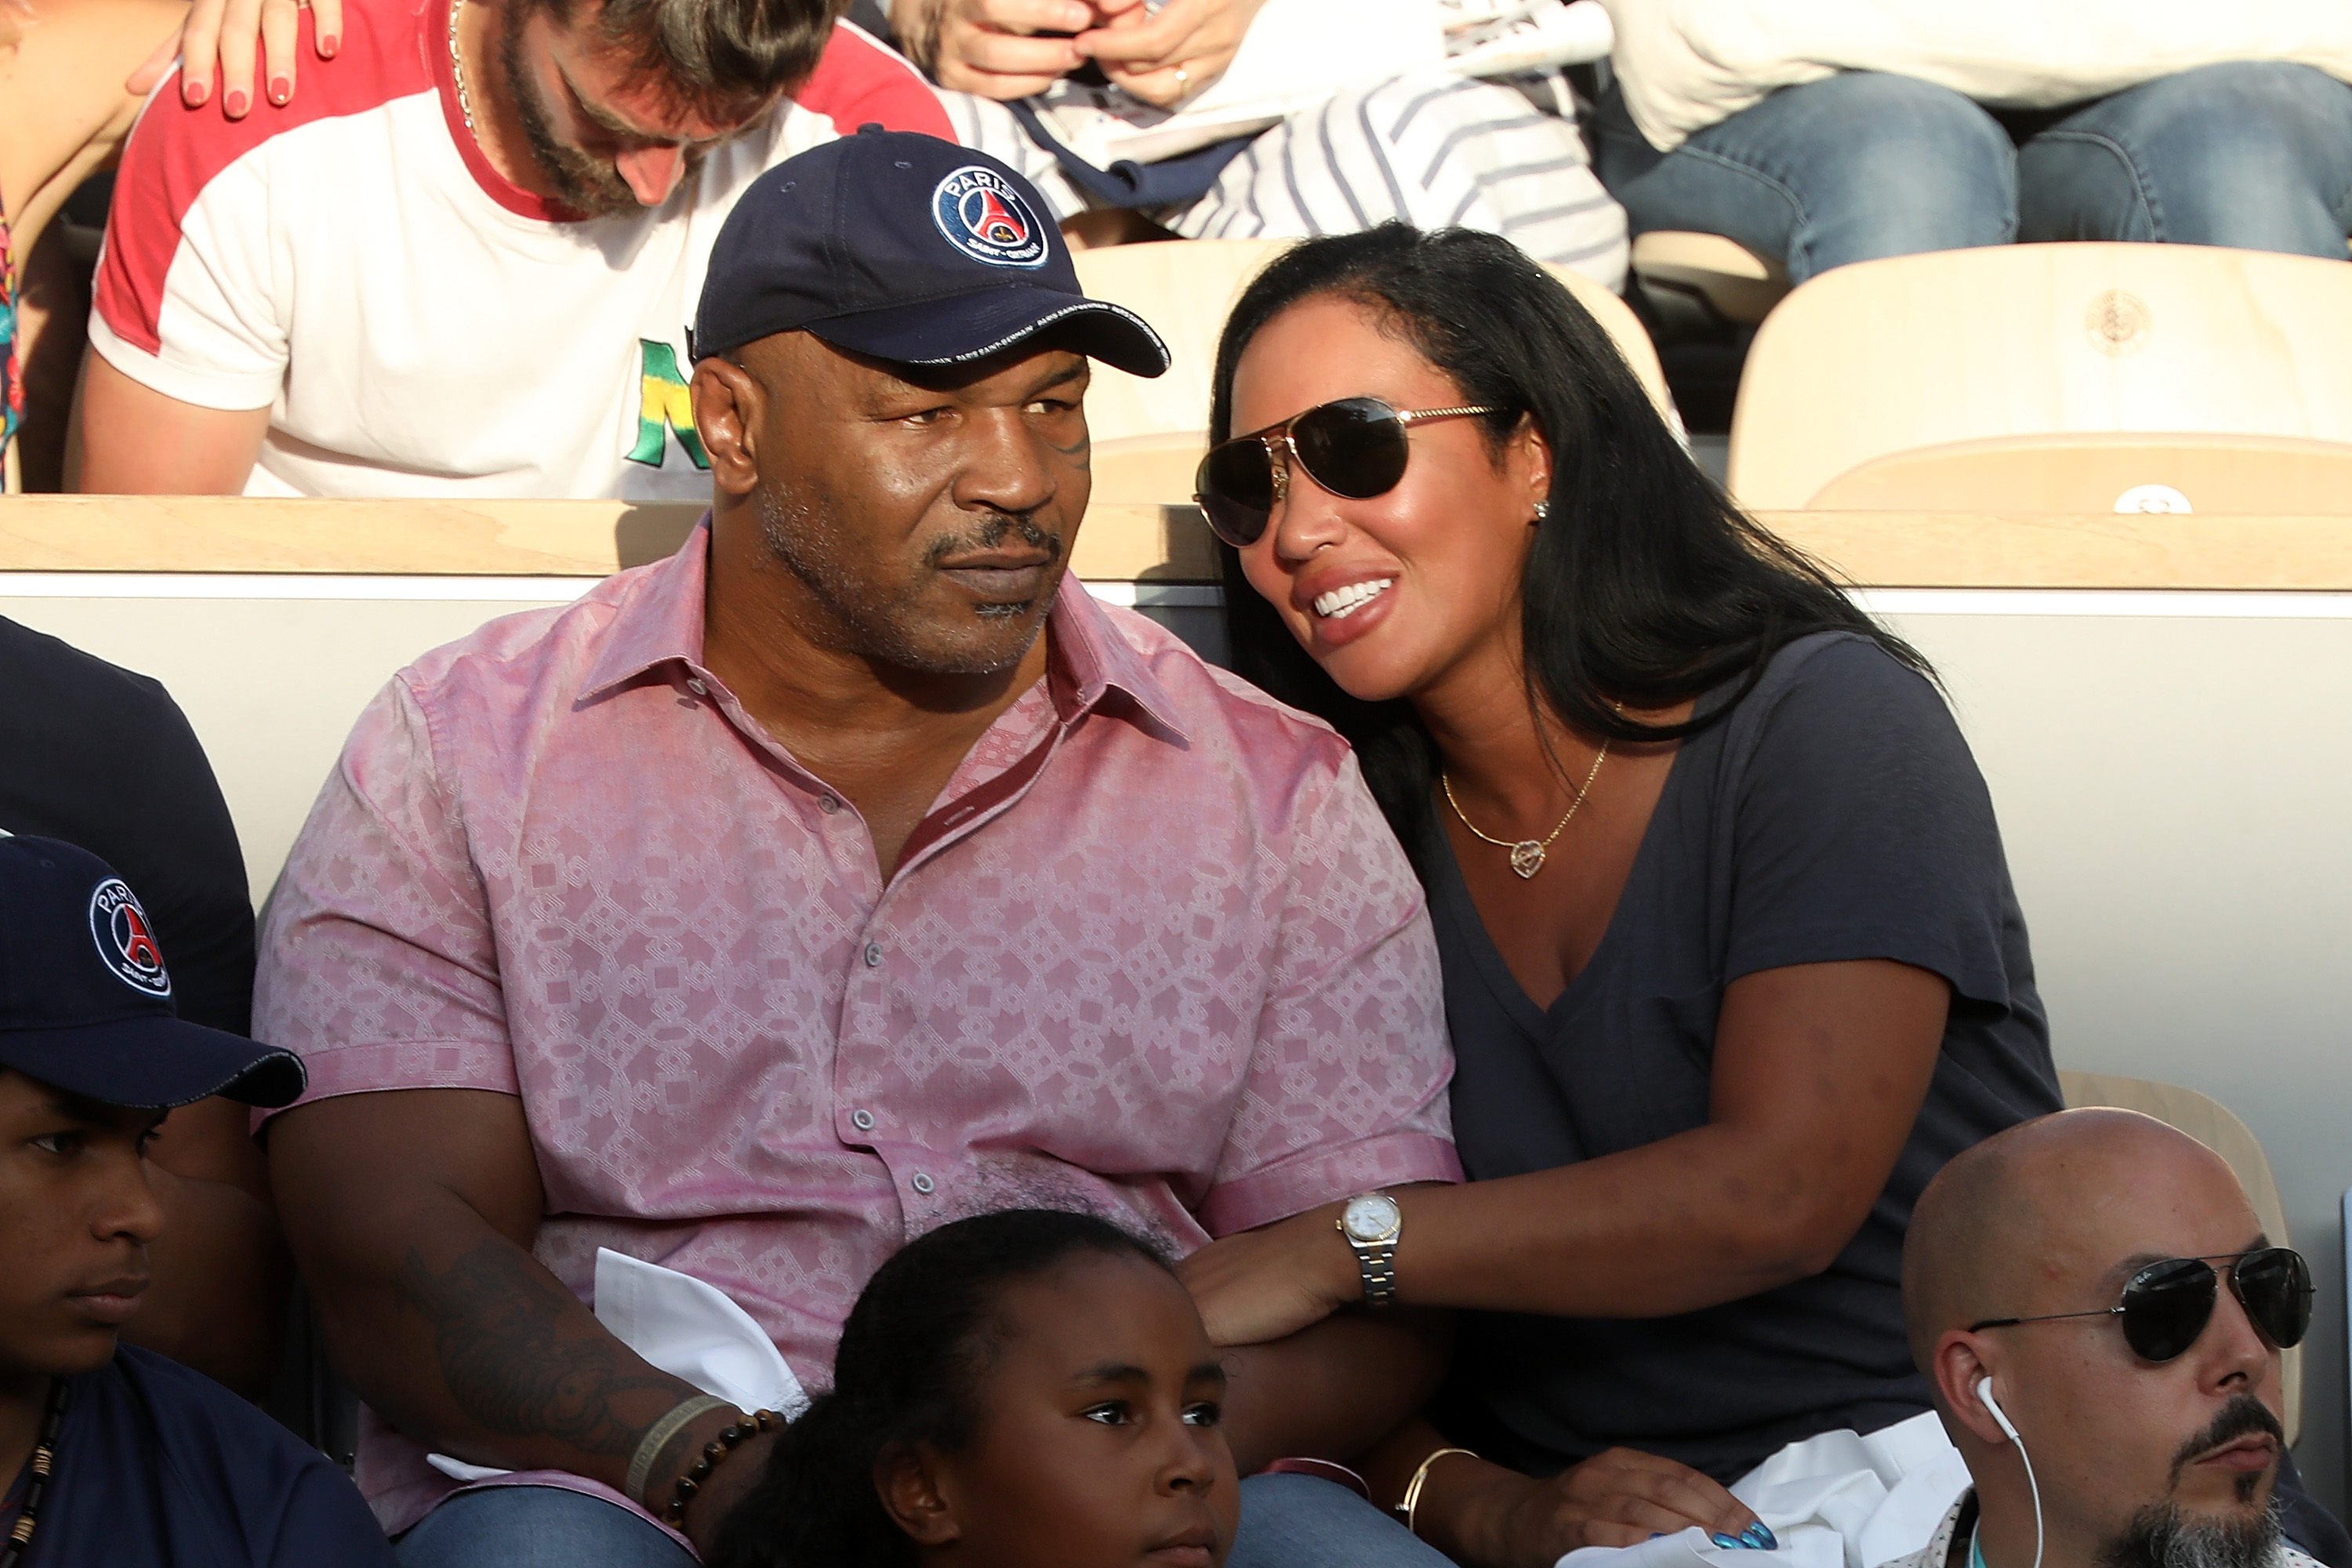 Mike Tyson on Serena Williams: ‘I Don’t Want to Get in the Ring With This GOAT’